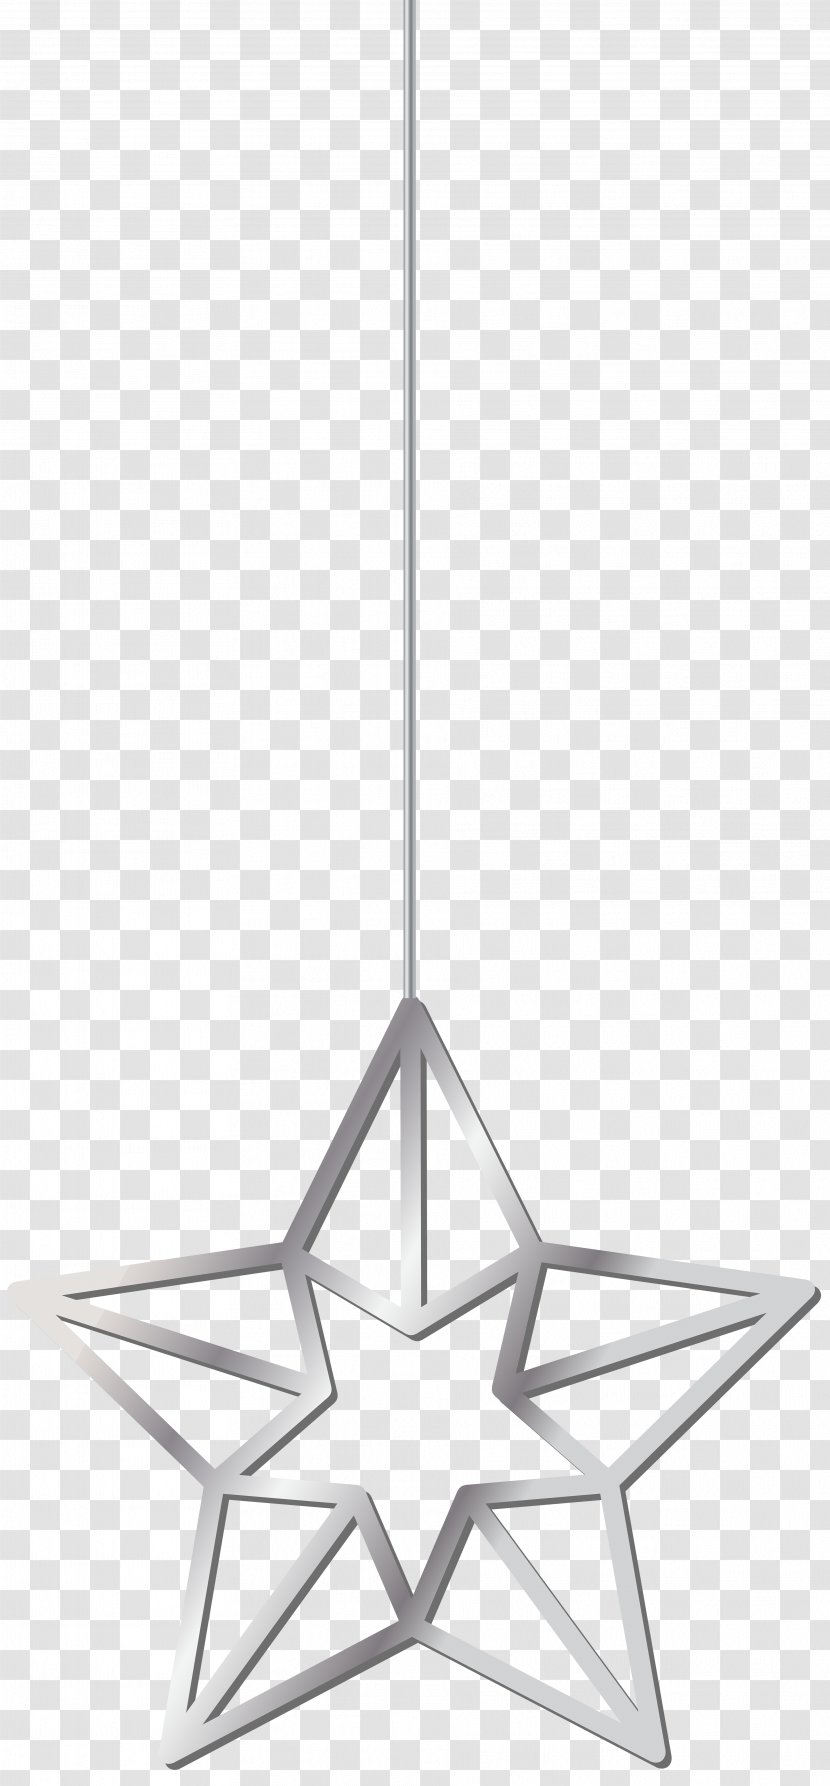 Earring Star Silver Gold - Black And White - Hanging Transparent Clip Art Transparent PNG